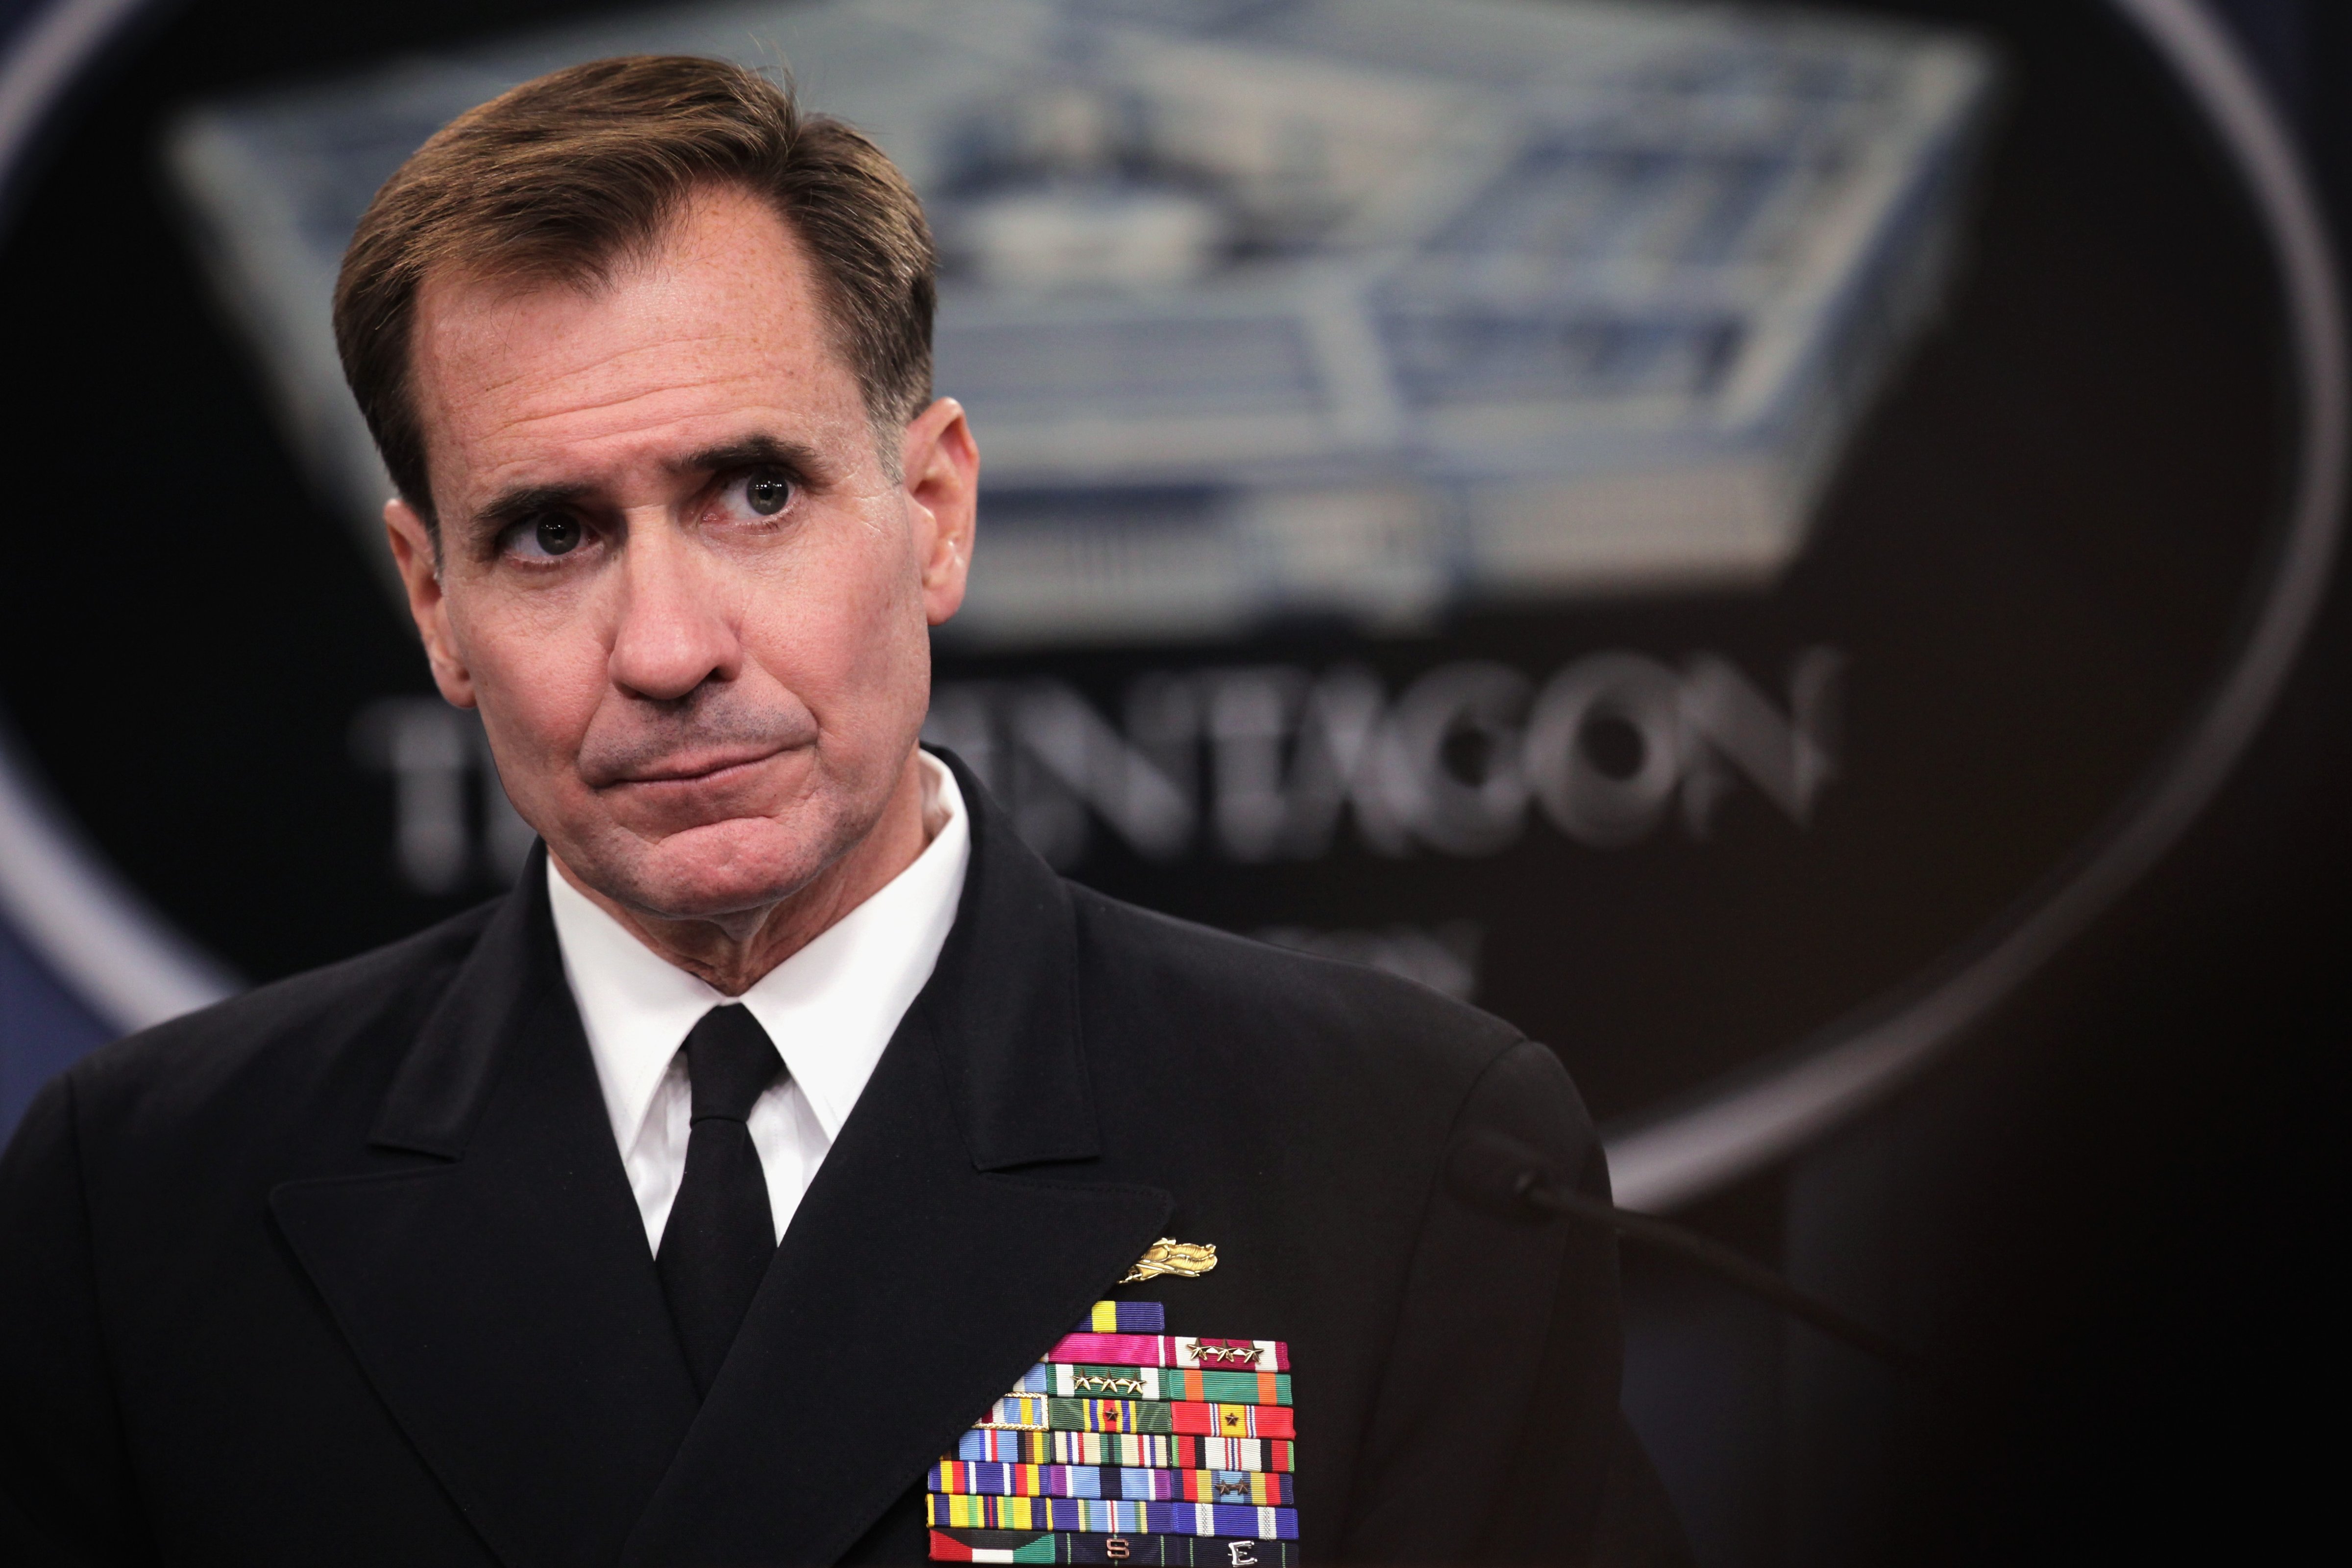 Pentagon Press Secretary Rear Admiral John Kirby listens during a press briefing at the Pentagon August 29, 2014 in Arlington, Virginia. (Alex Wong—Getty Images)